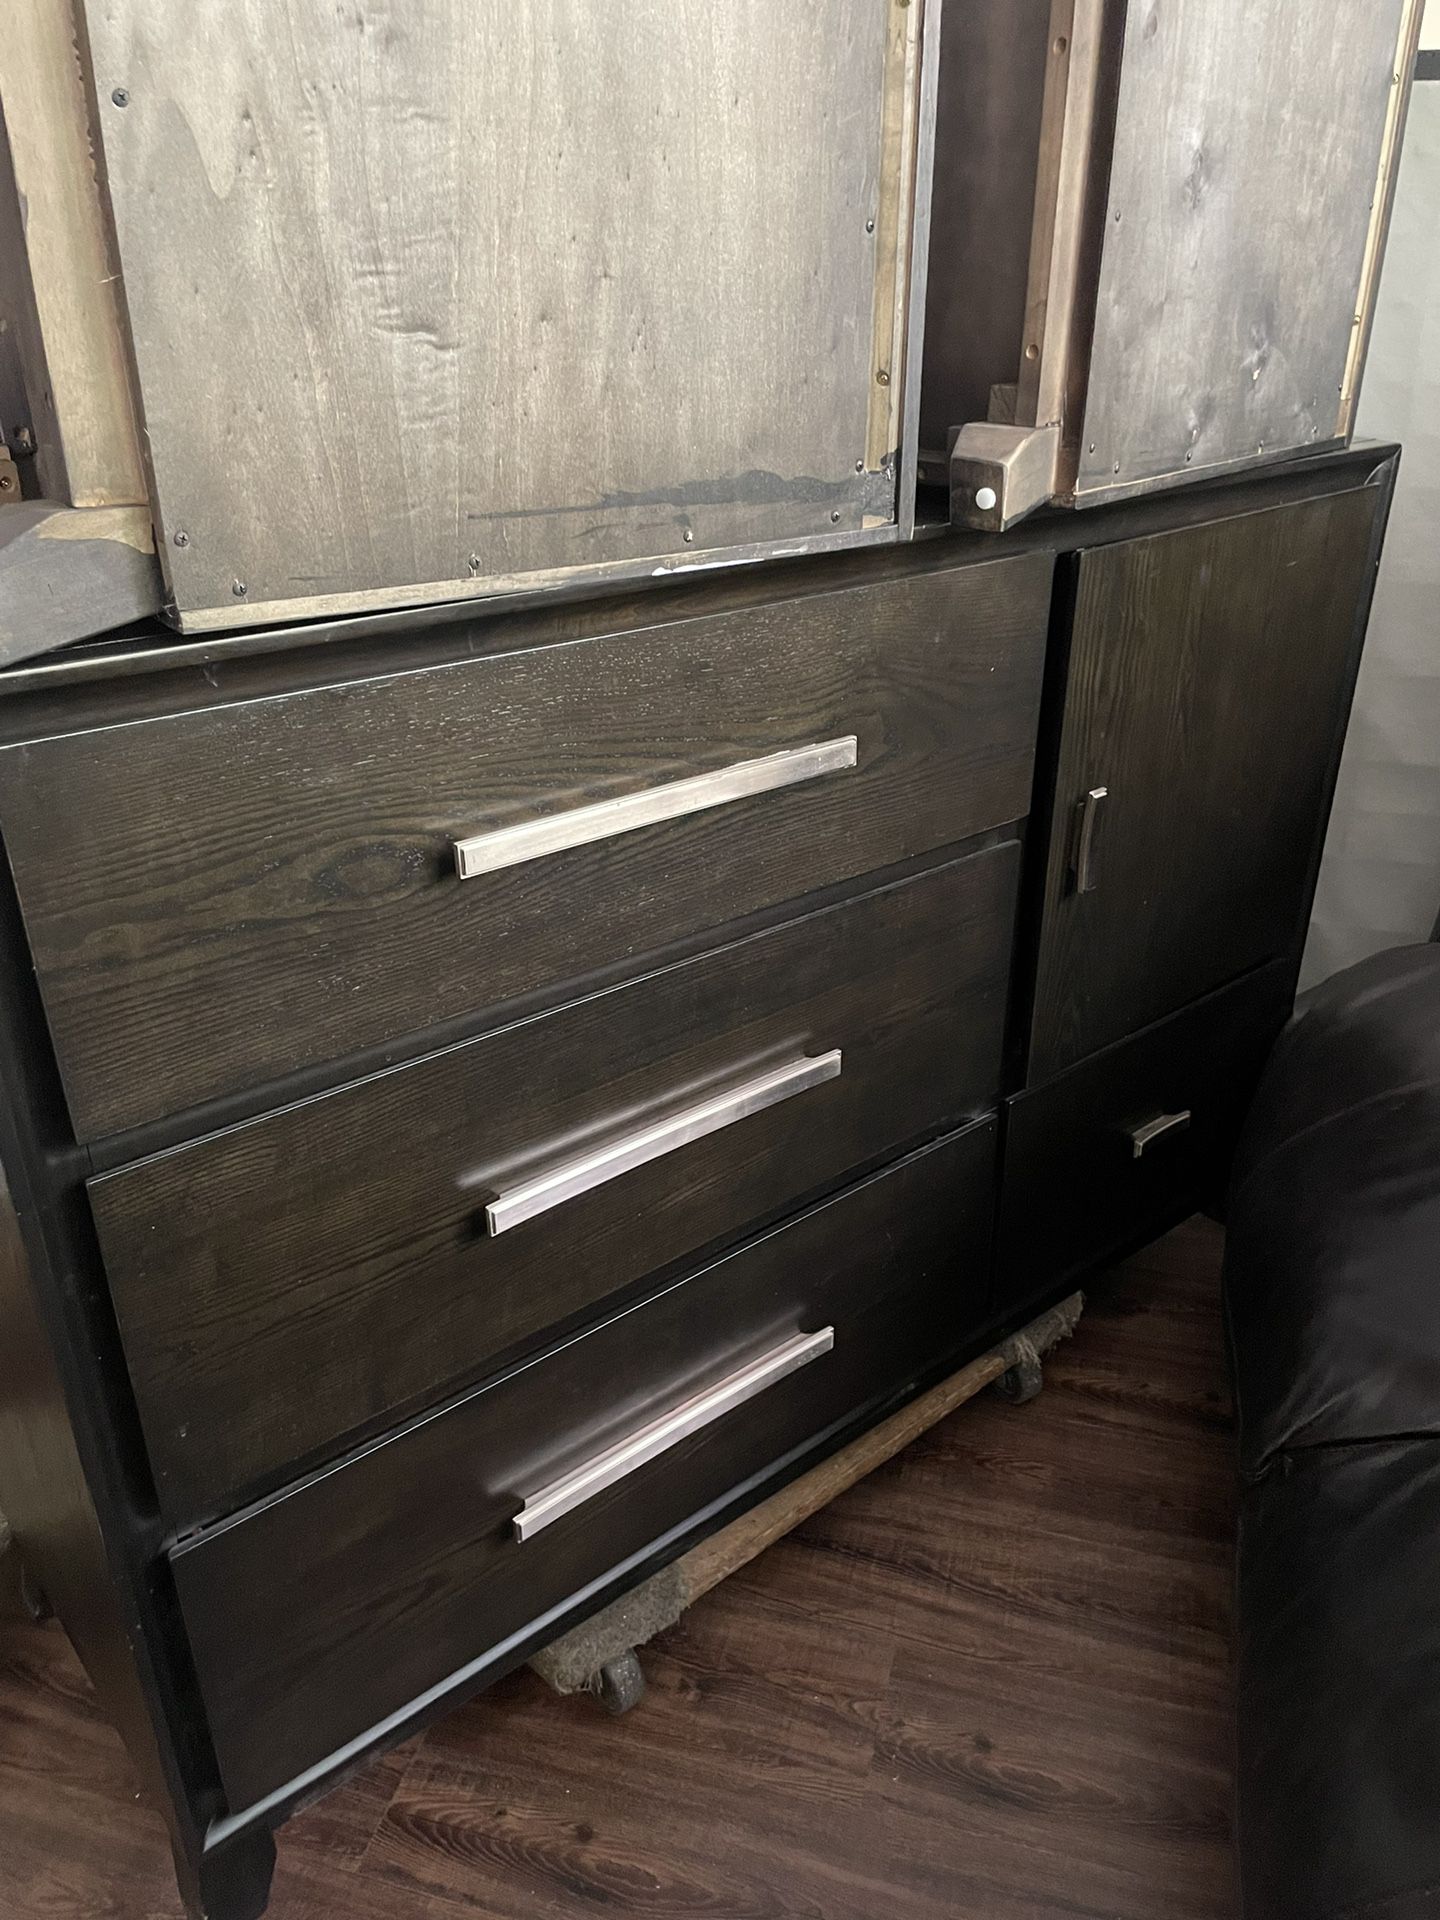 Large Dresser And Two Nightstands For Sale!